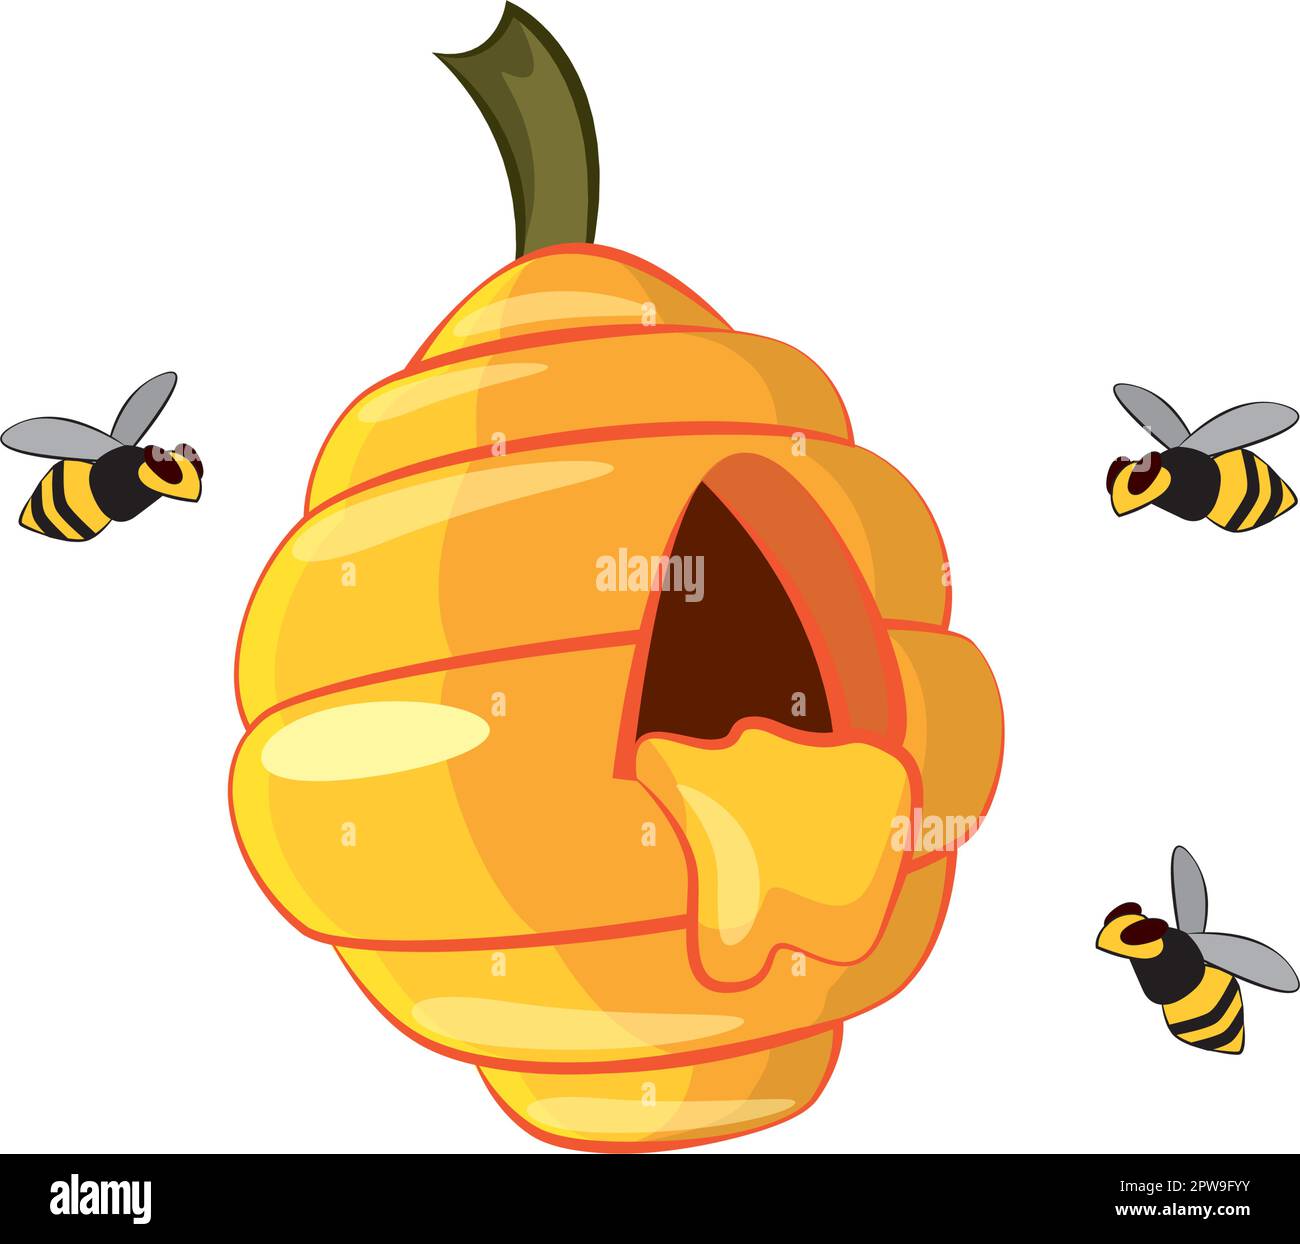 Bees Flying Around Beehive lllustration Stock Vector